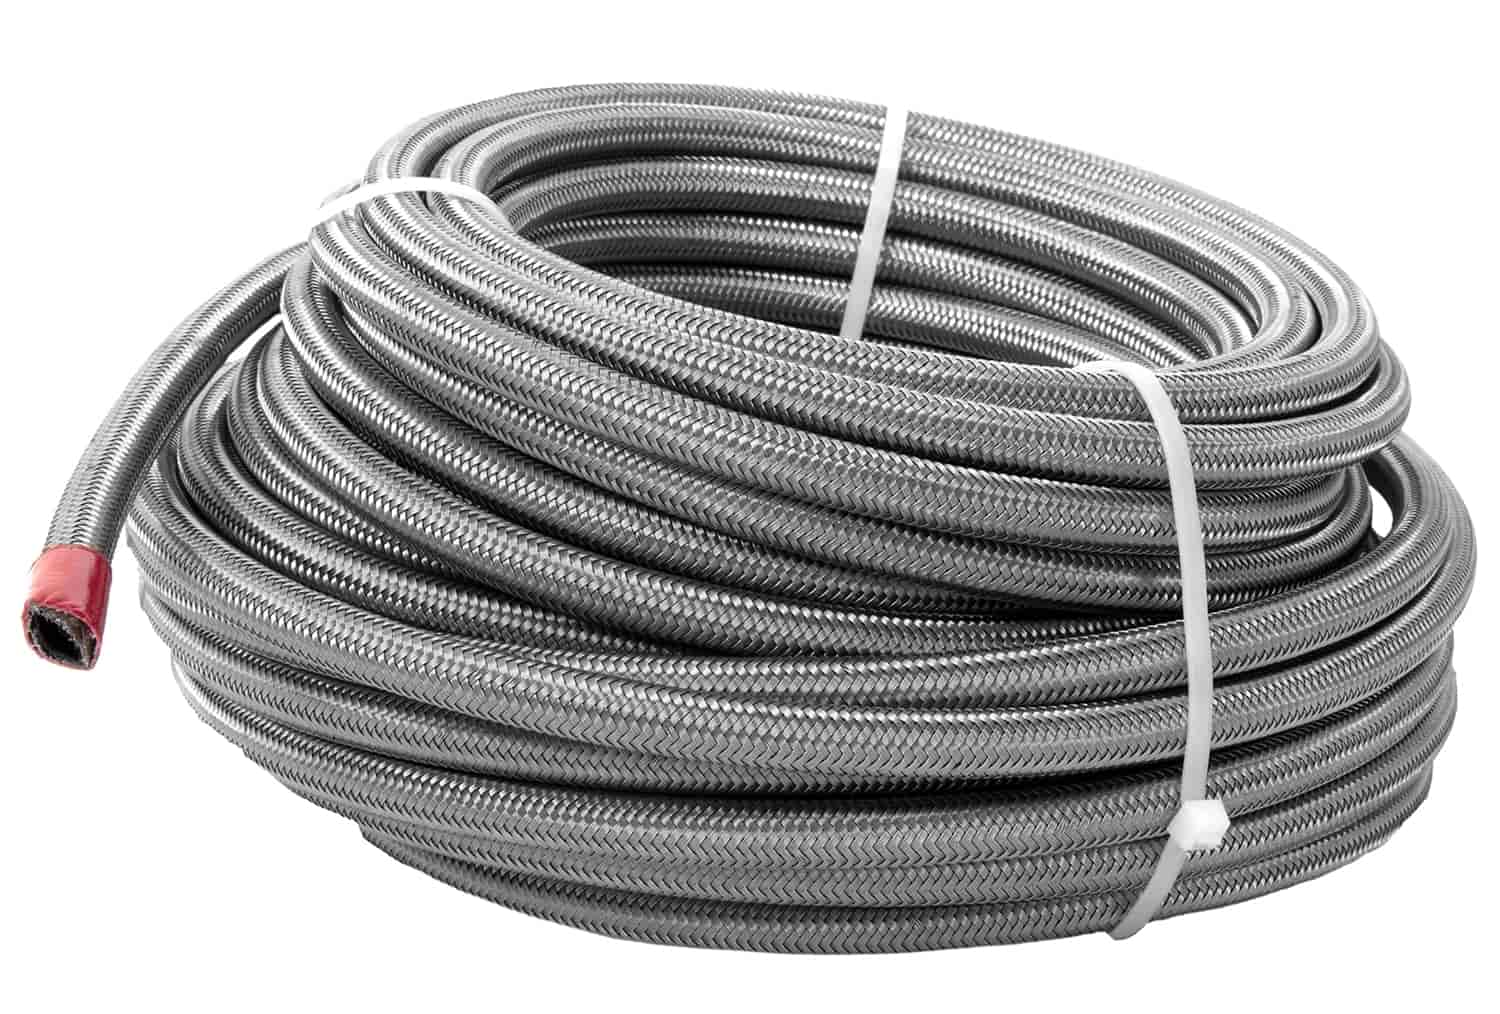 Braided Stainless Steel PTFE Fuel Hose -8 AN x 4 ft